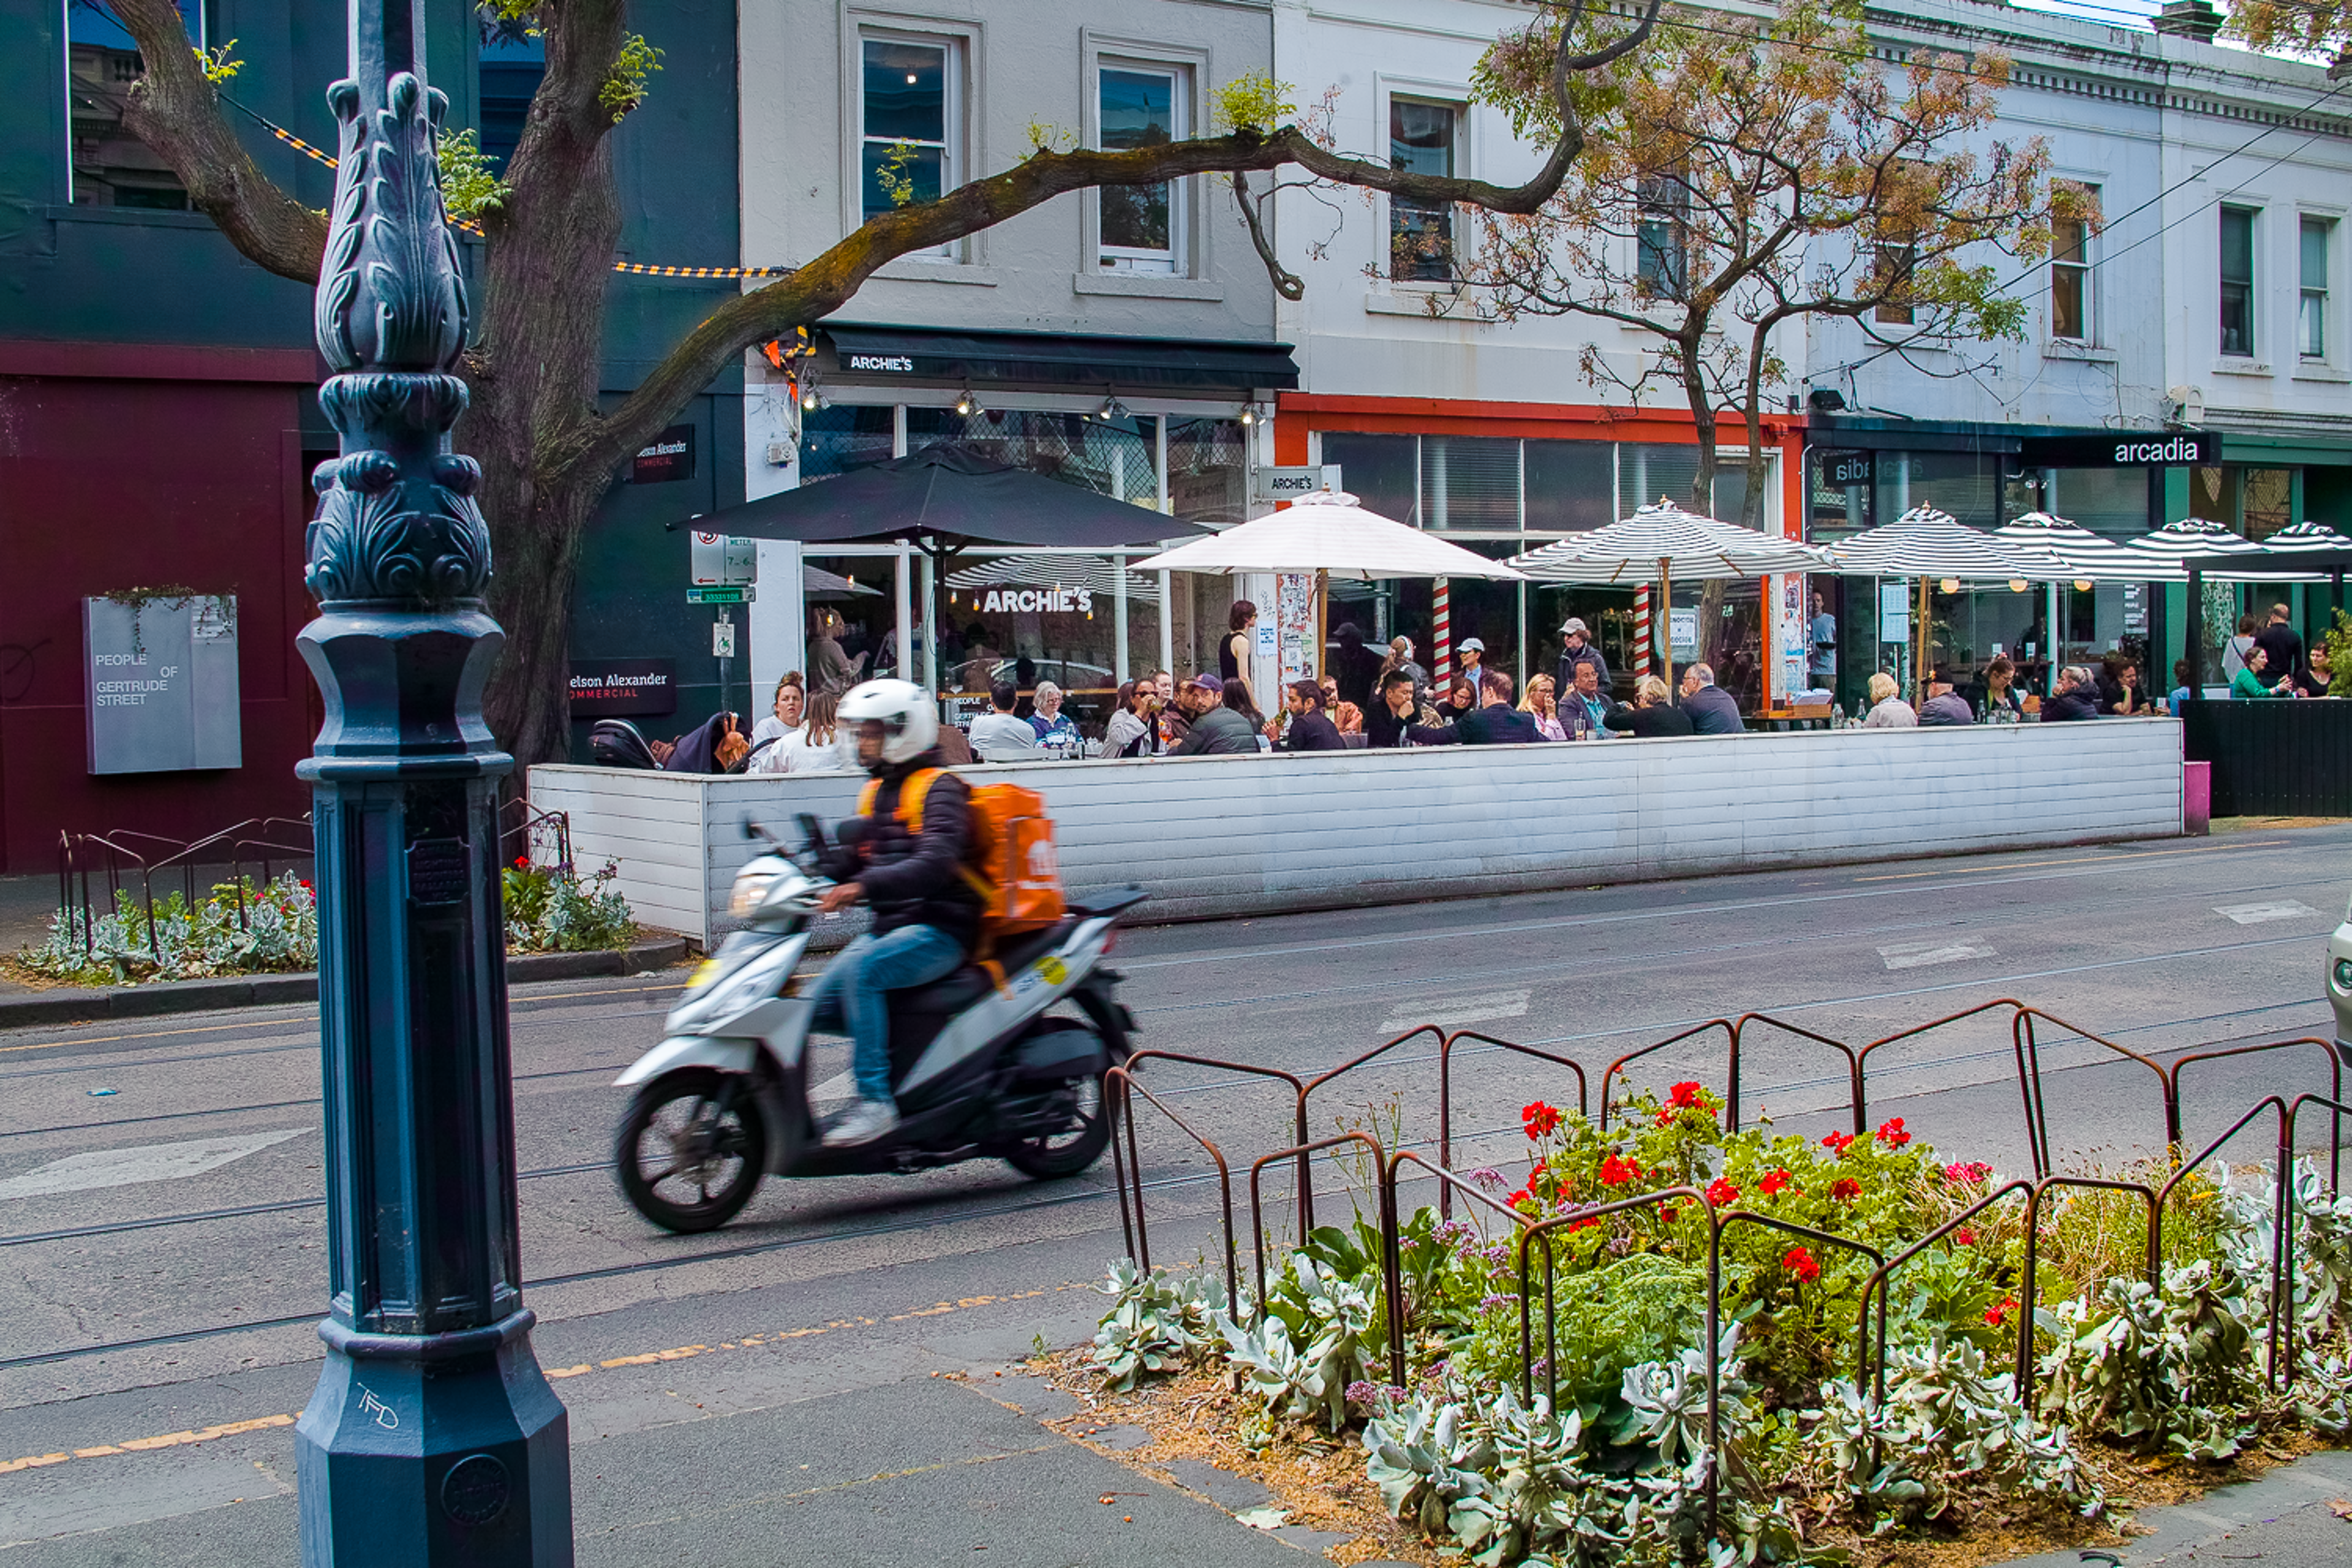 A bustling street scene featuring an outdoor cafe with patrons under striped umbrellas, framed by a decorative street lamp and vibrant flower beds, as a motorcyclist zooms by.